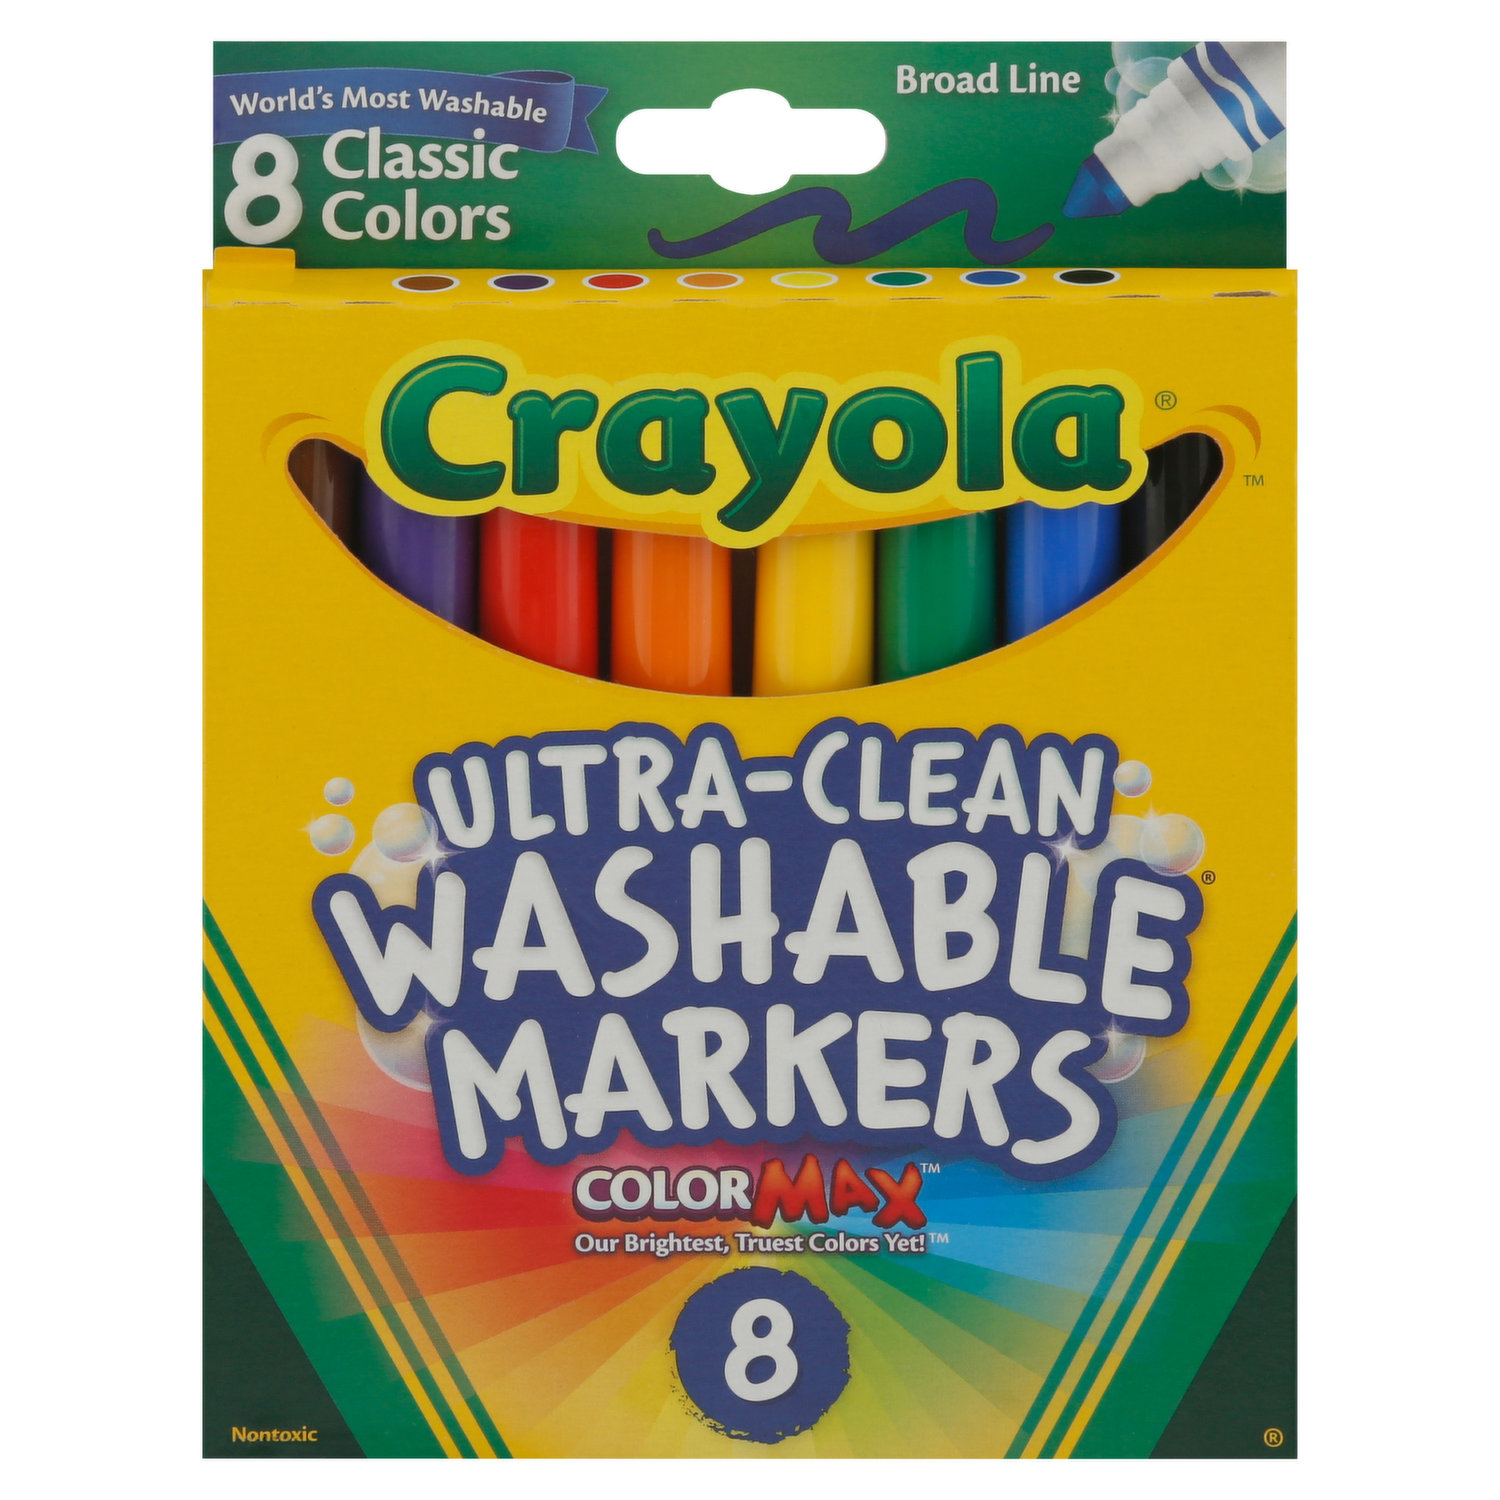 CRAYOLA Washable Markers - My First Crayola Toddler Toys! - Washable  Markers - My First Crayola Toddler Toys! . shop for CRAYOLA products in  India.